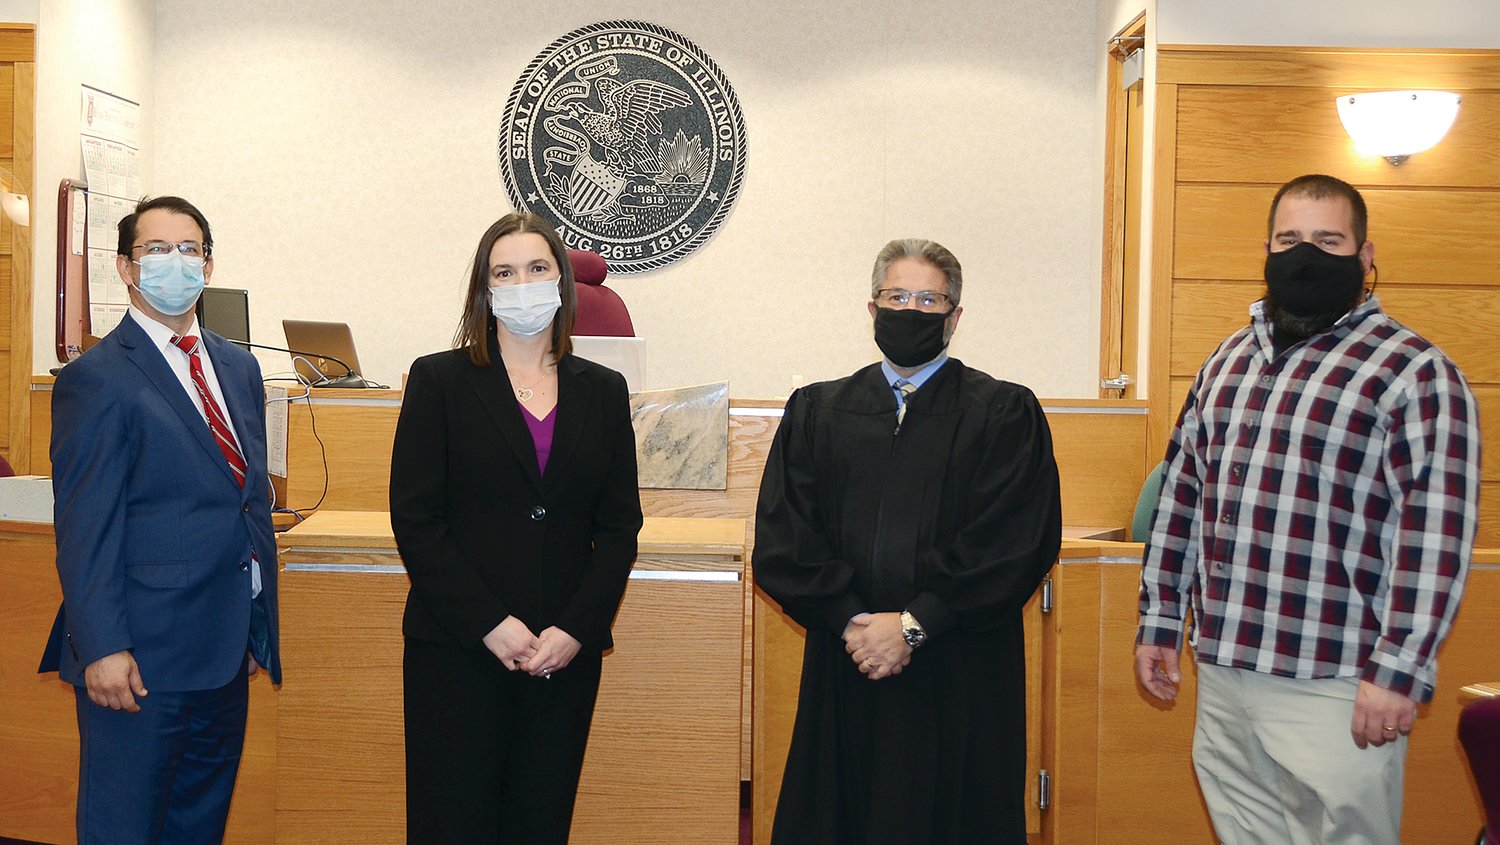 Judge Roberts Swears In County Officials The Journal News